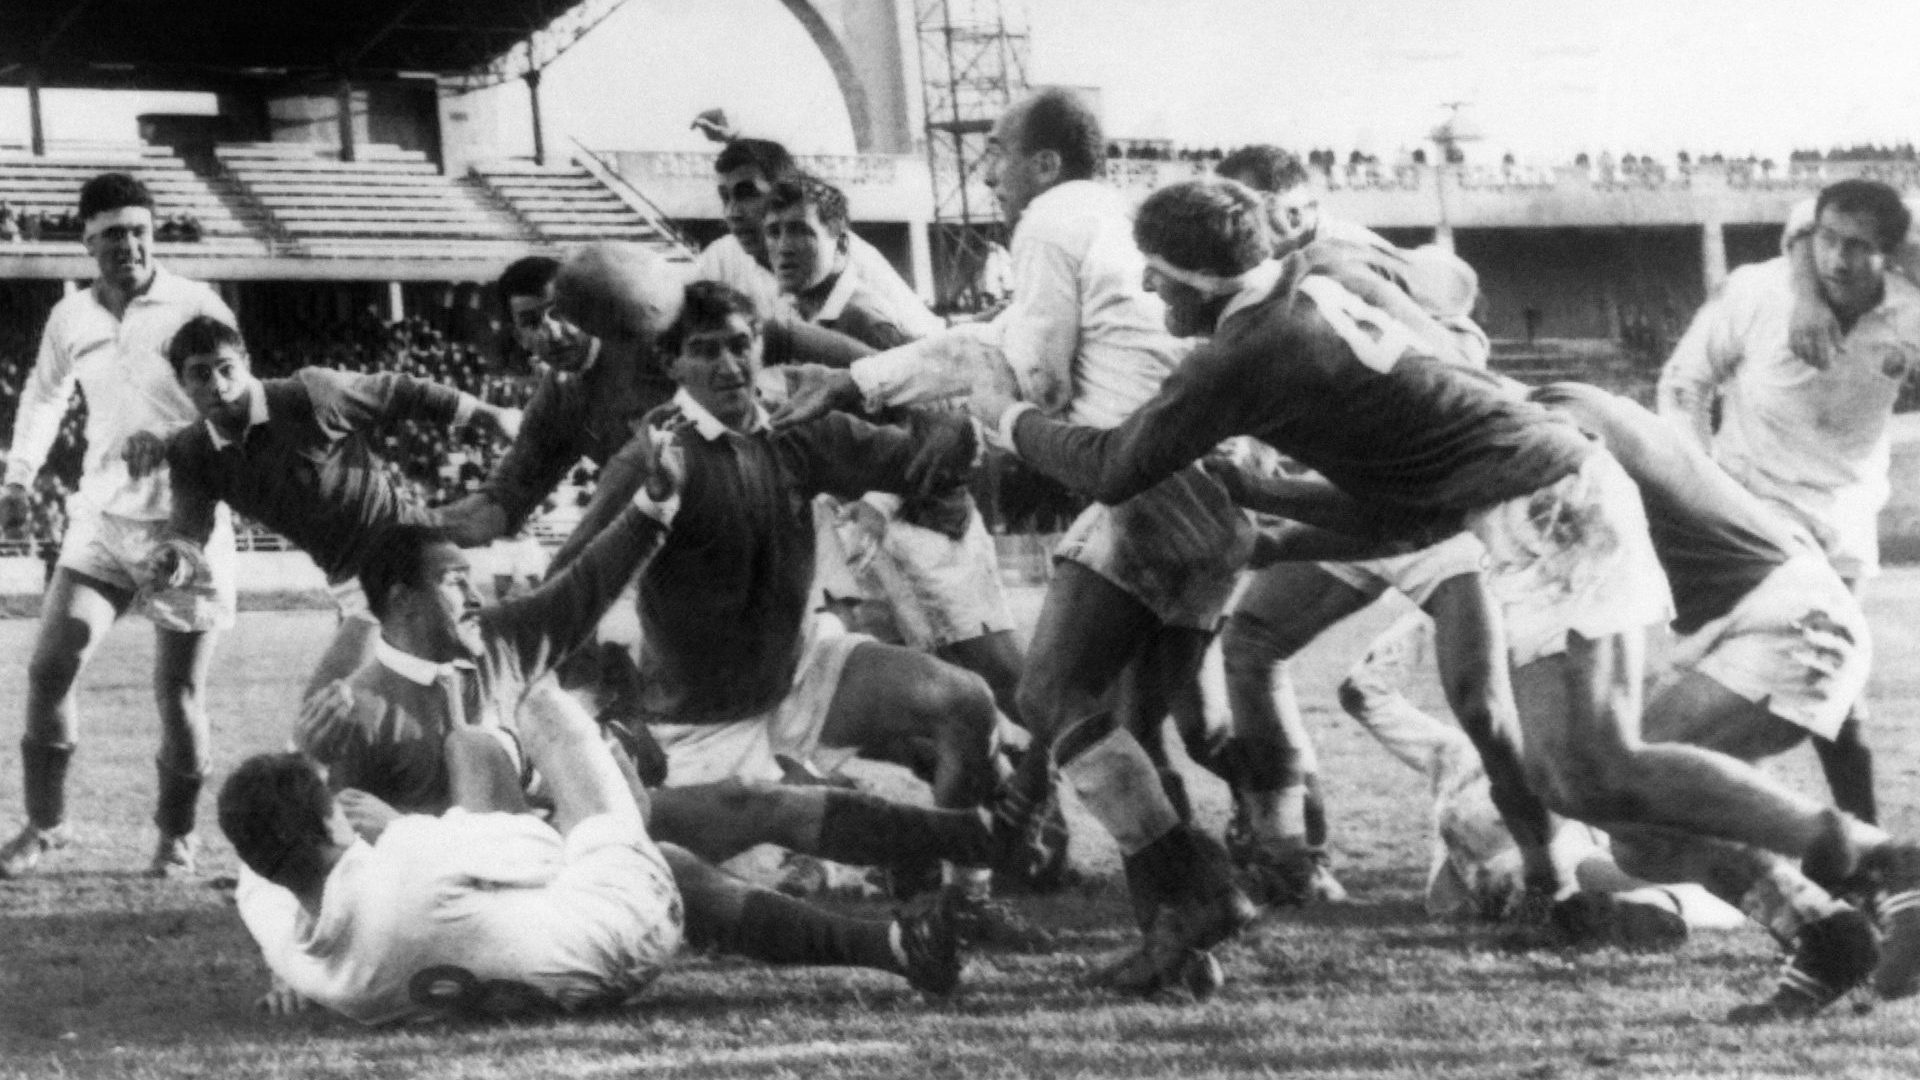 France play Romania at the Gerland Stadium in Lyon in the FIRA Championship in 1965. The west tried to use ‘rugger diplomacy’ to forge stronger links with Romania. Photo: AFP/Getty